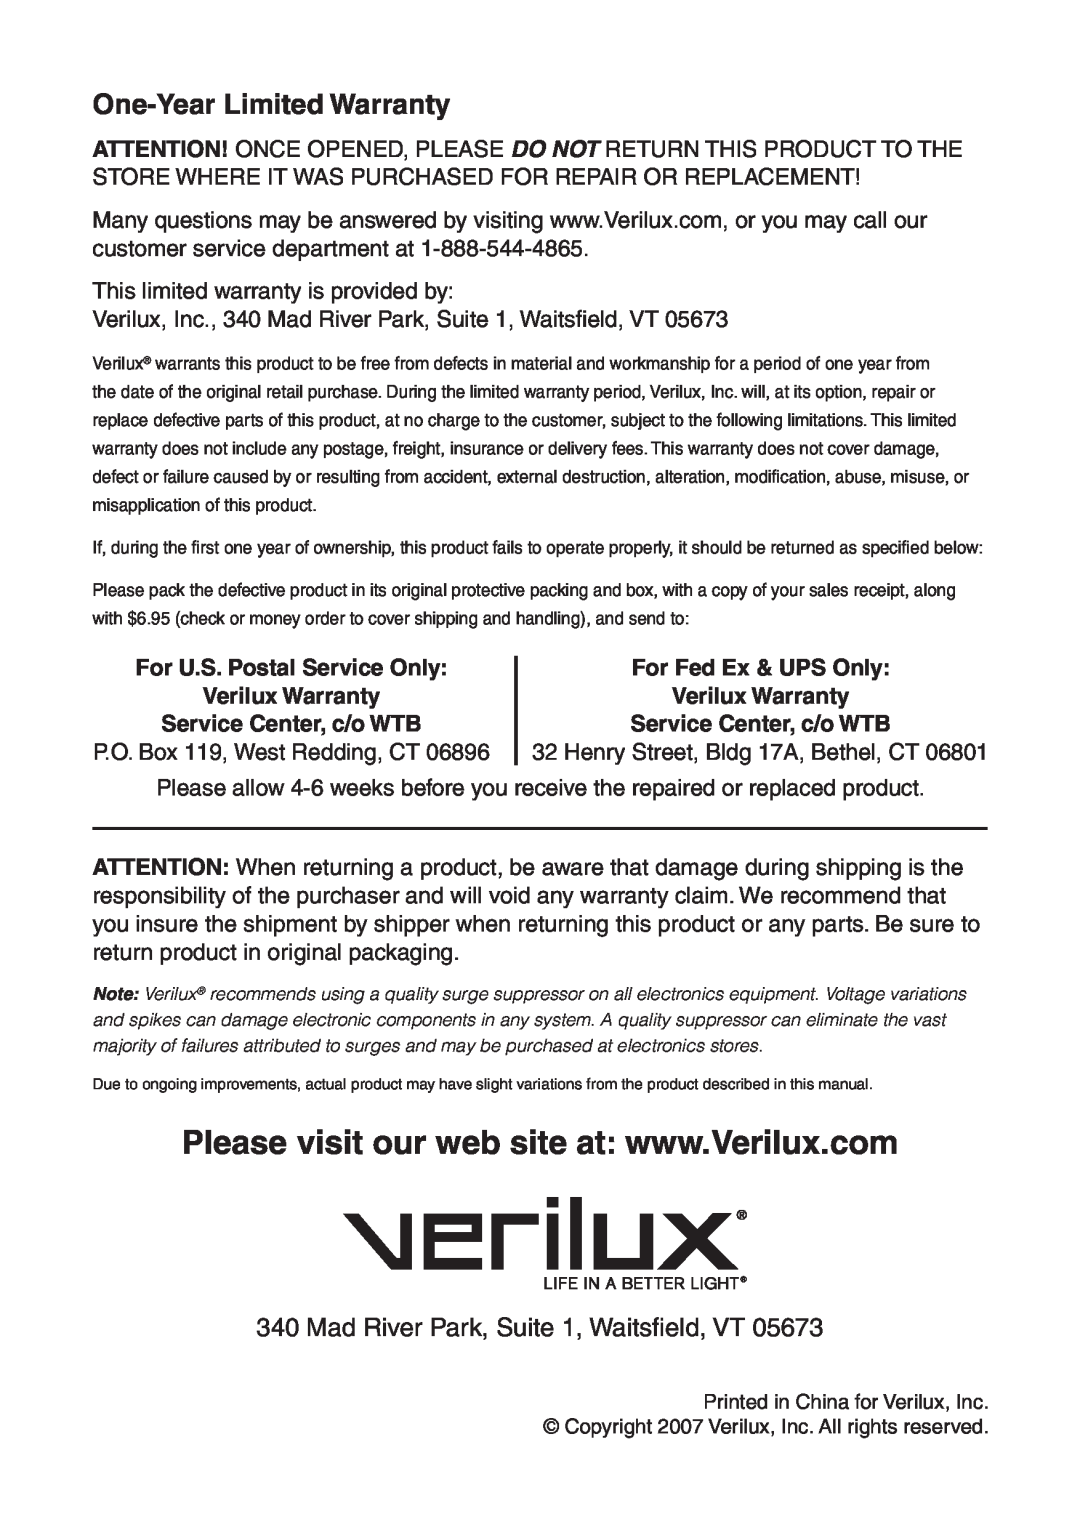 Verilux VD06 manual One-YearLimited Warranty, Mad River Park, Suite 1, Waitsﬁeld, VT, Service Center, c/o WTB 